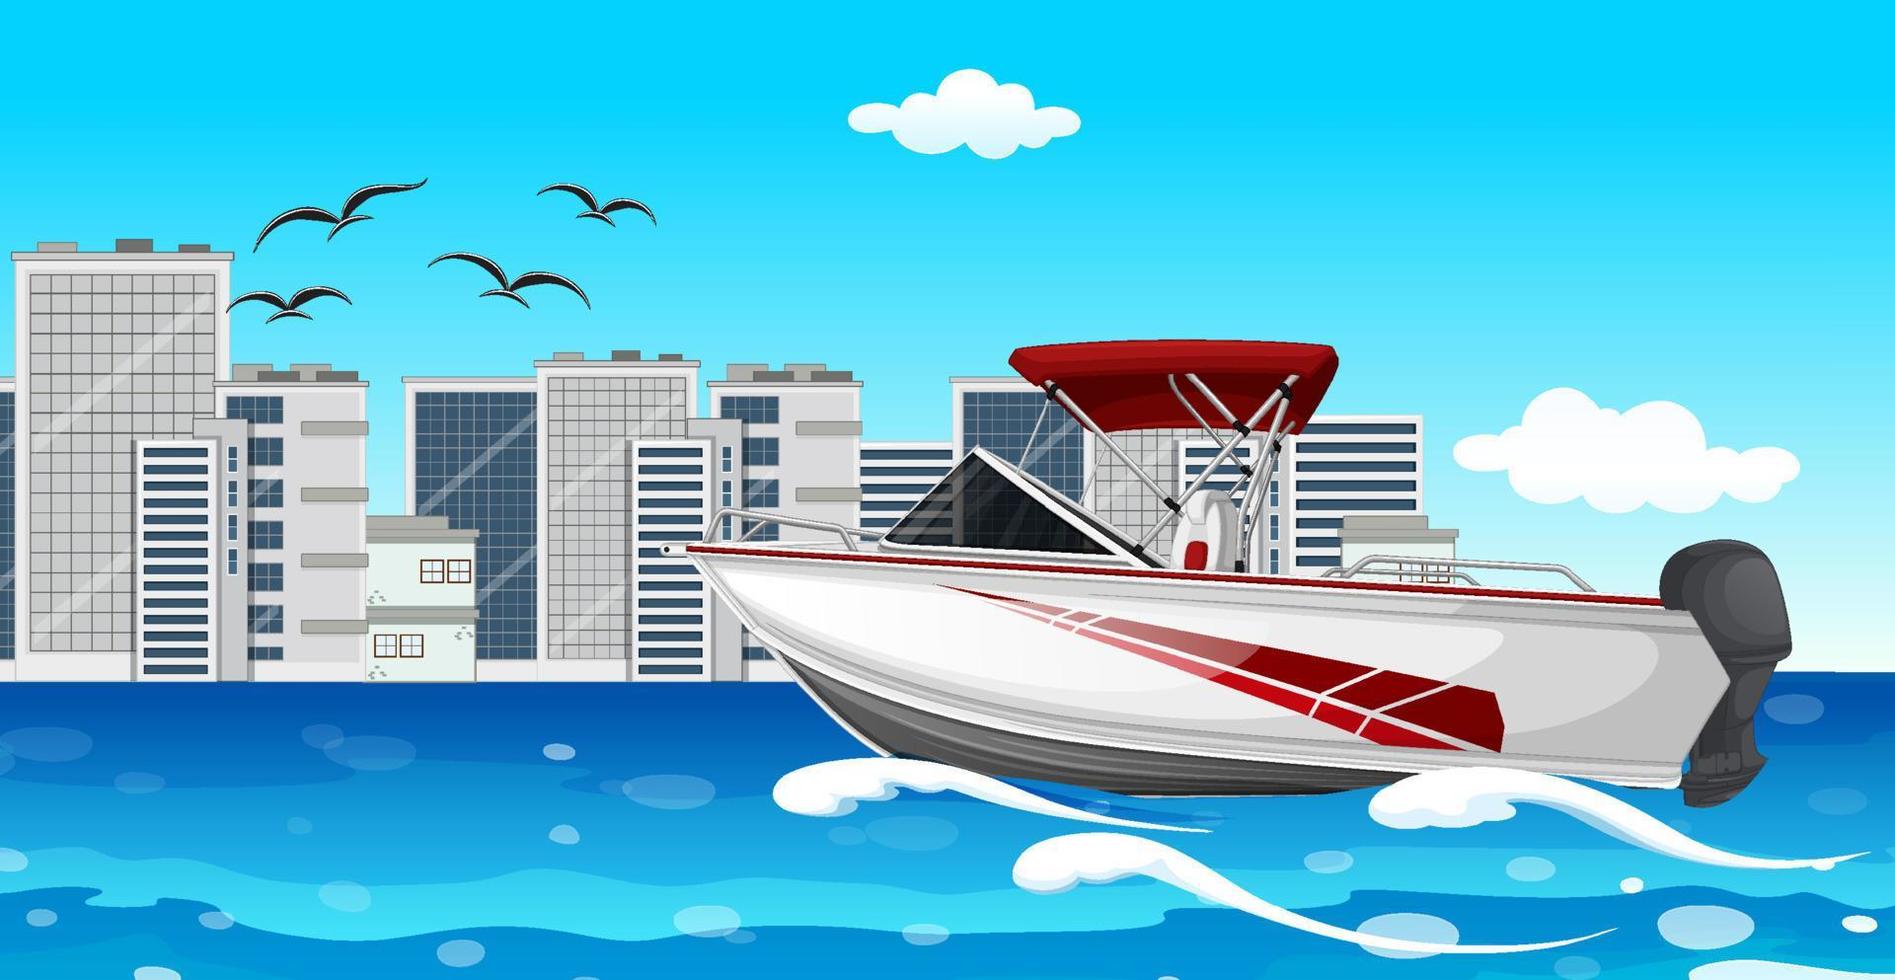 River city scene with a speedboat vector